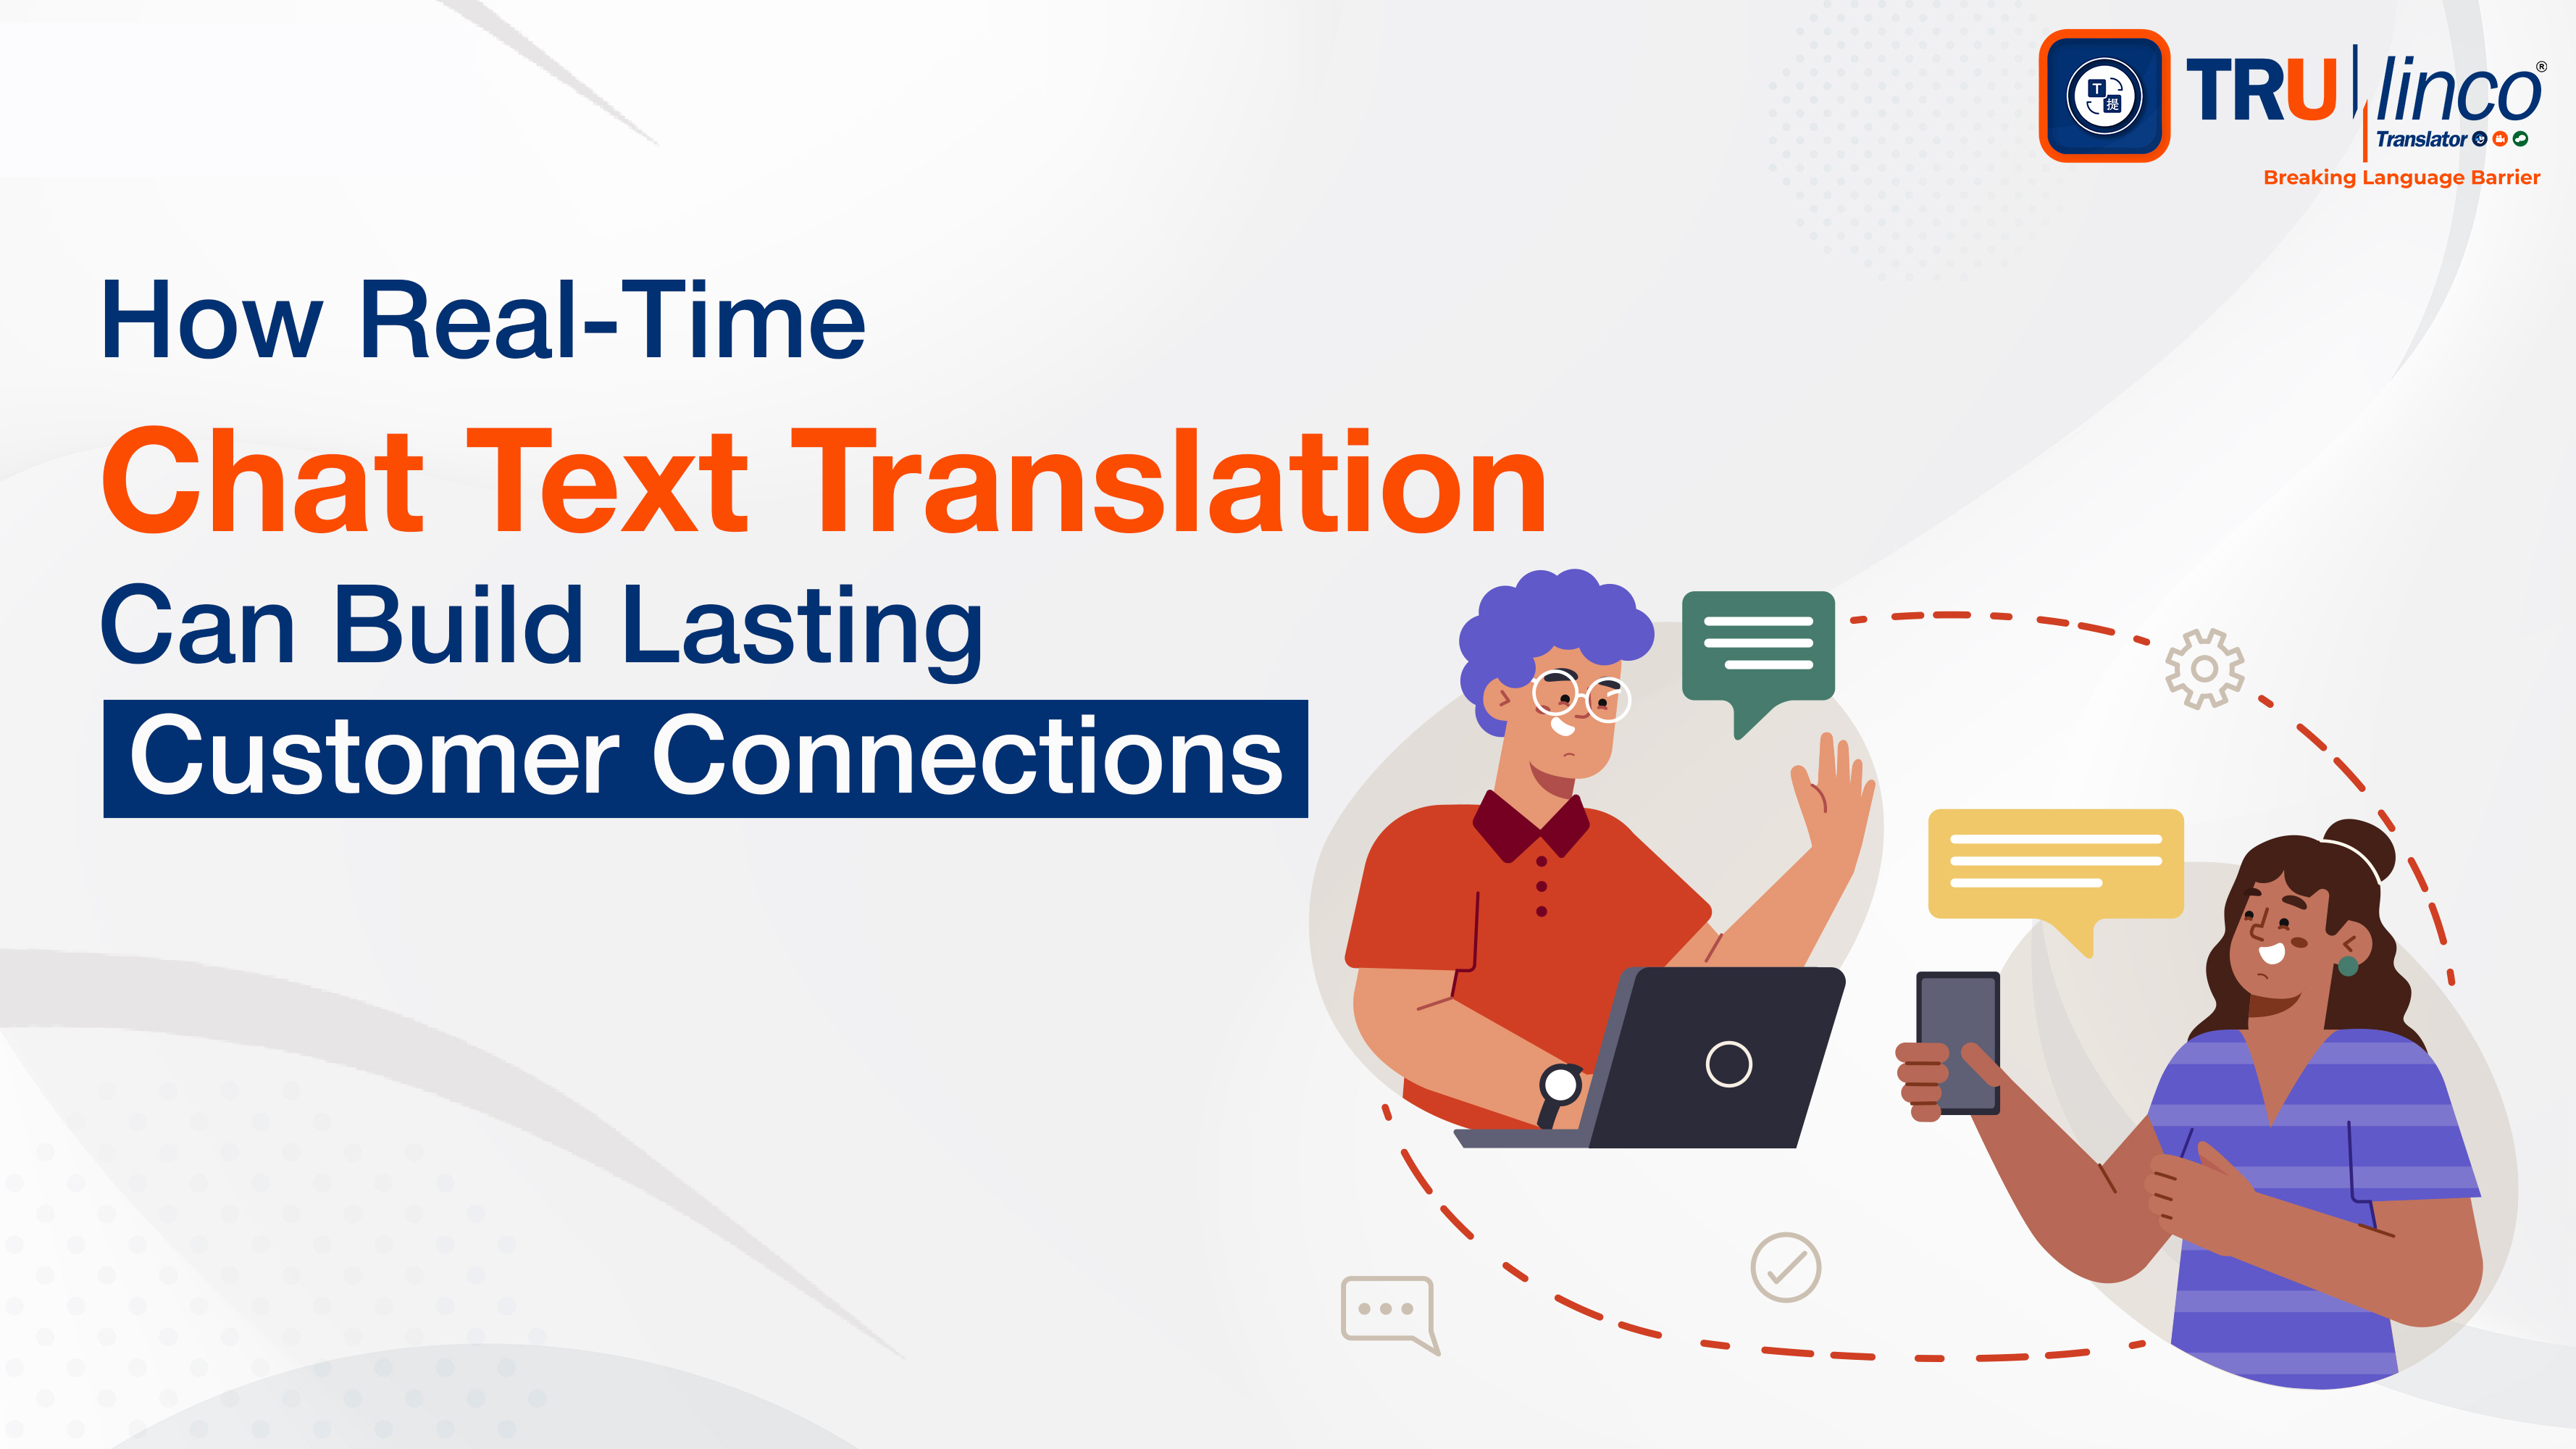 How Real-Time Chat Text Translation Can Build Lasting Customer Connections